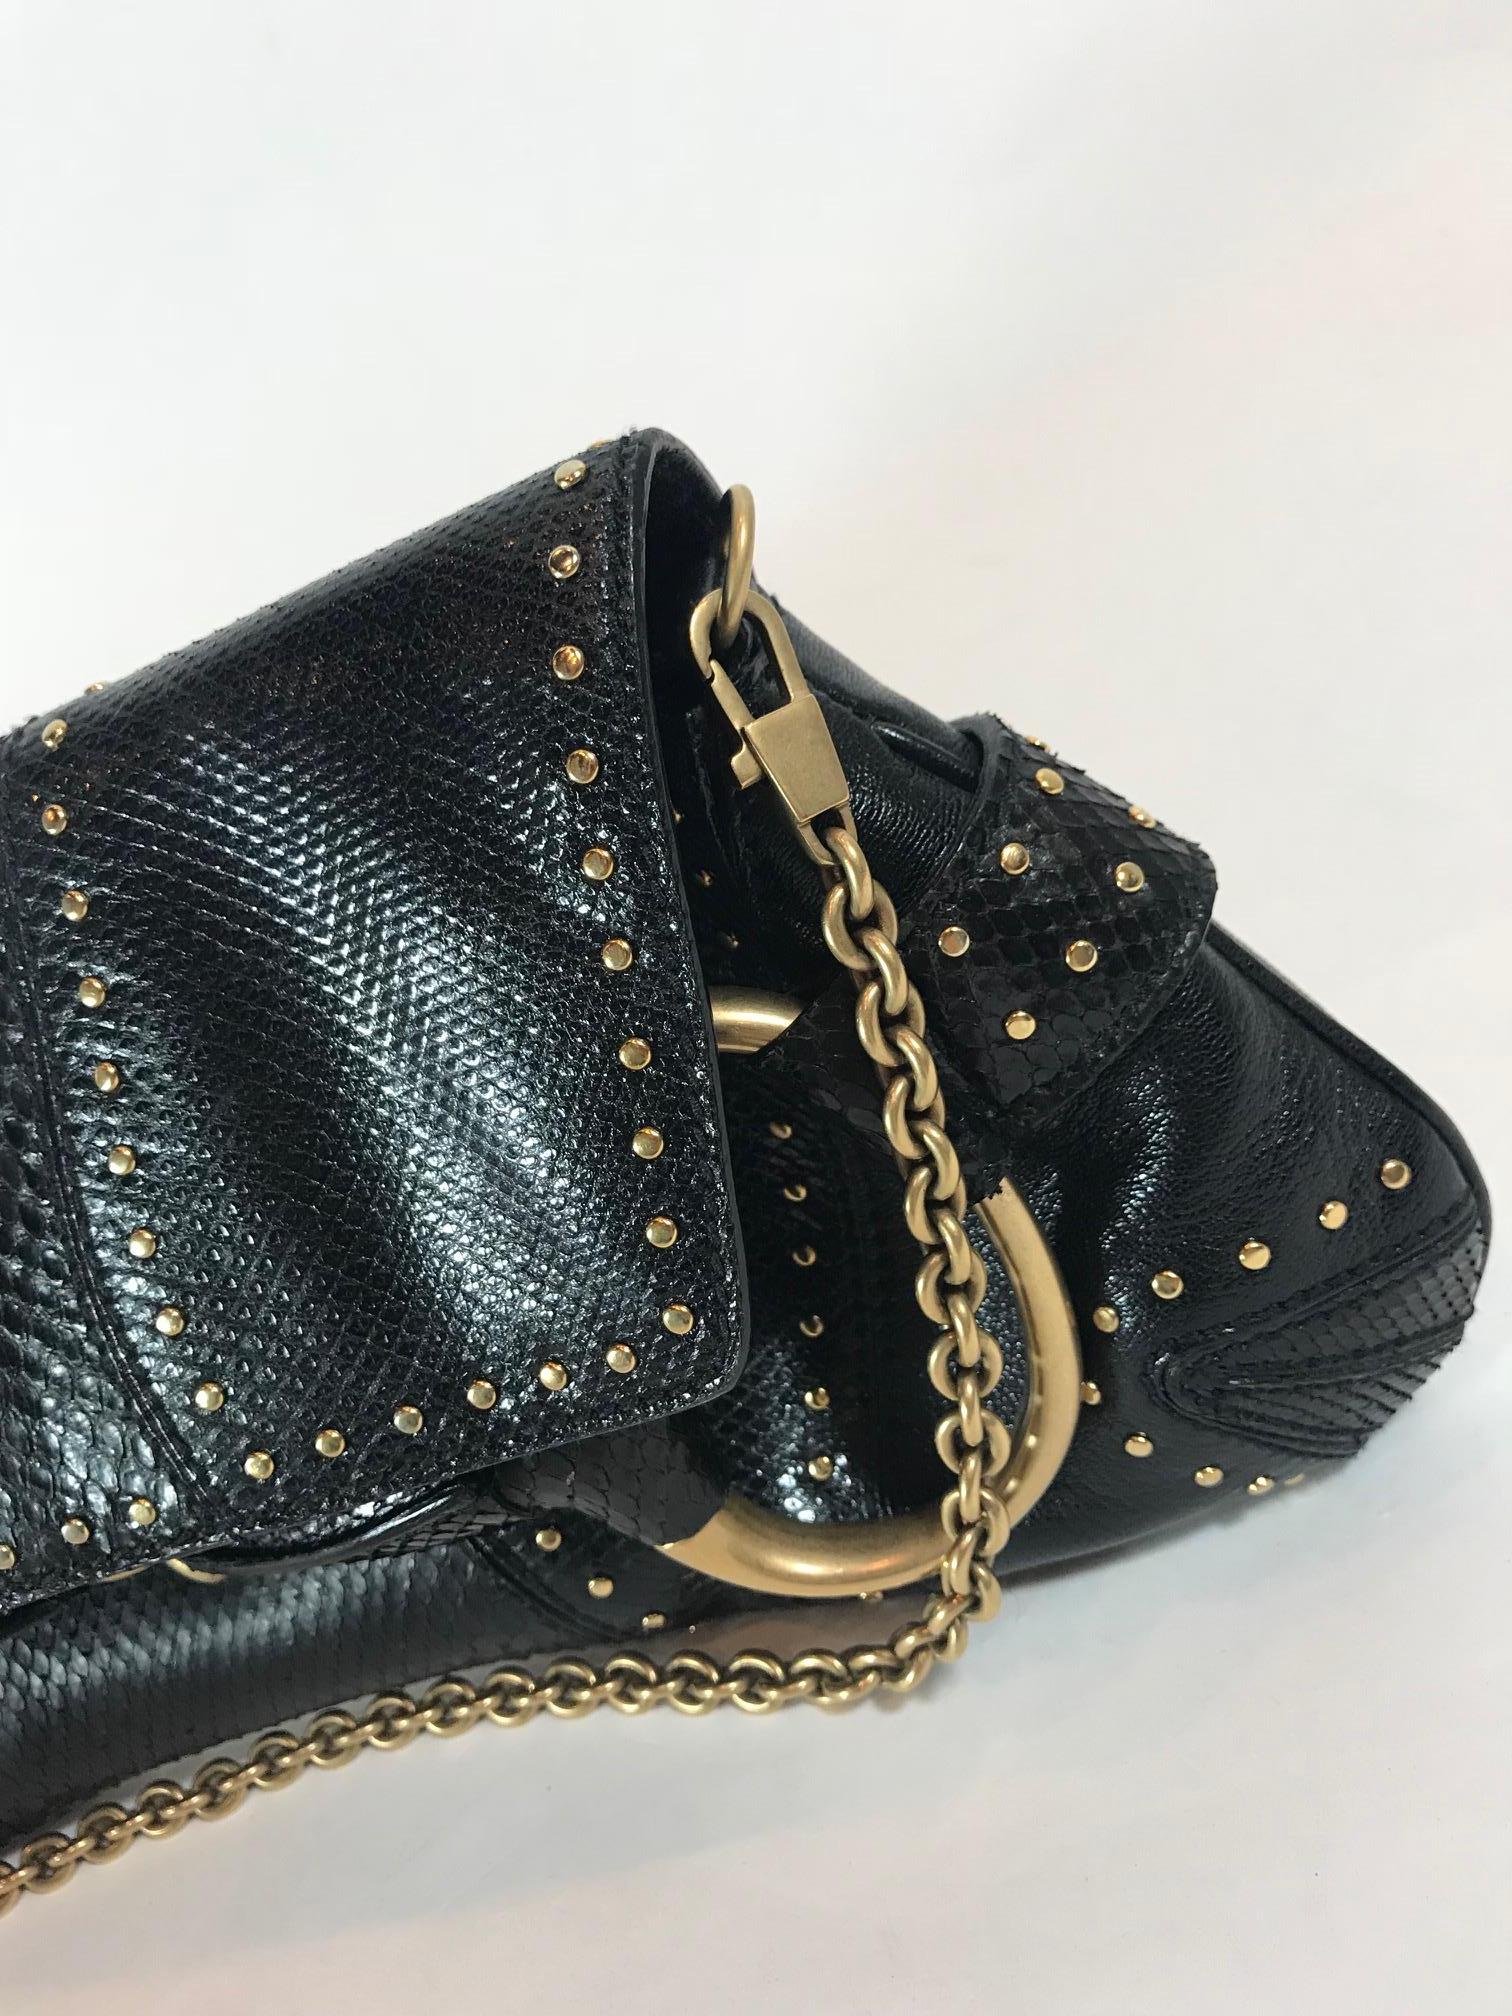 Gucci Python and Lizard Horsebit Clutch For Sale 5